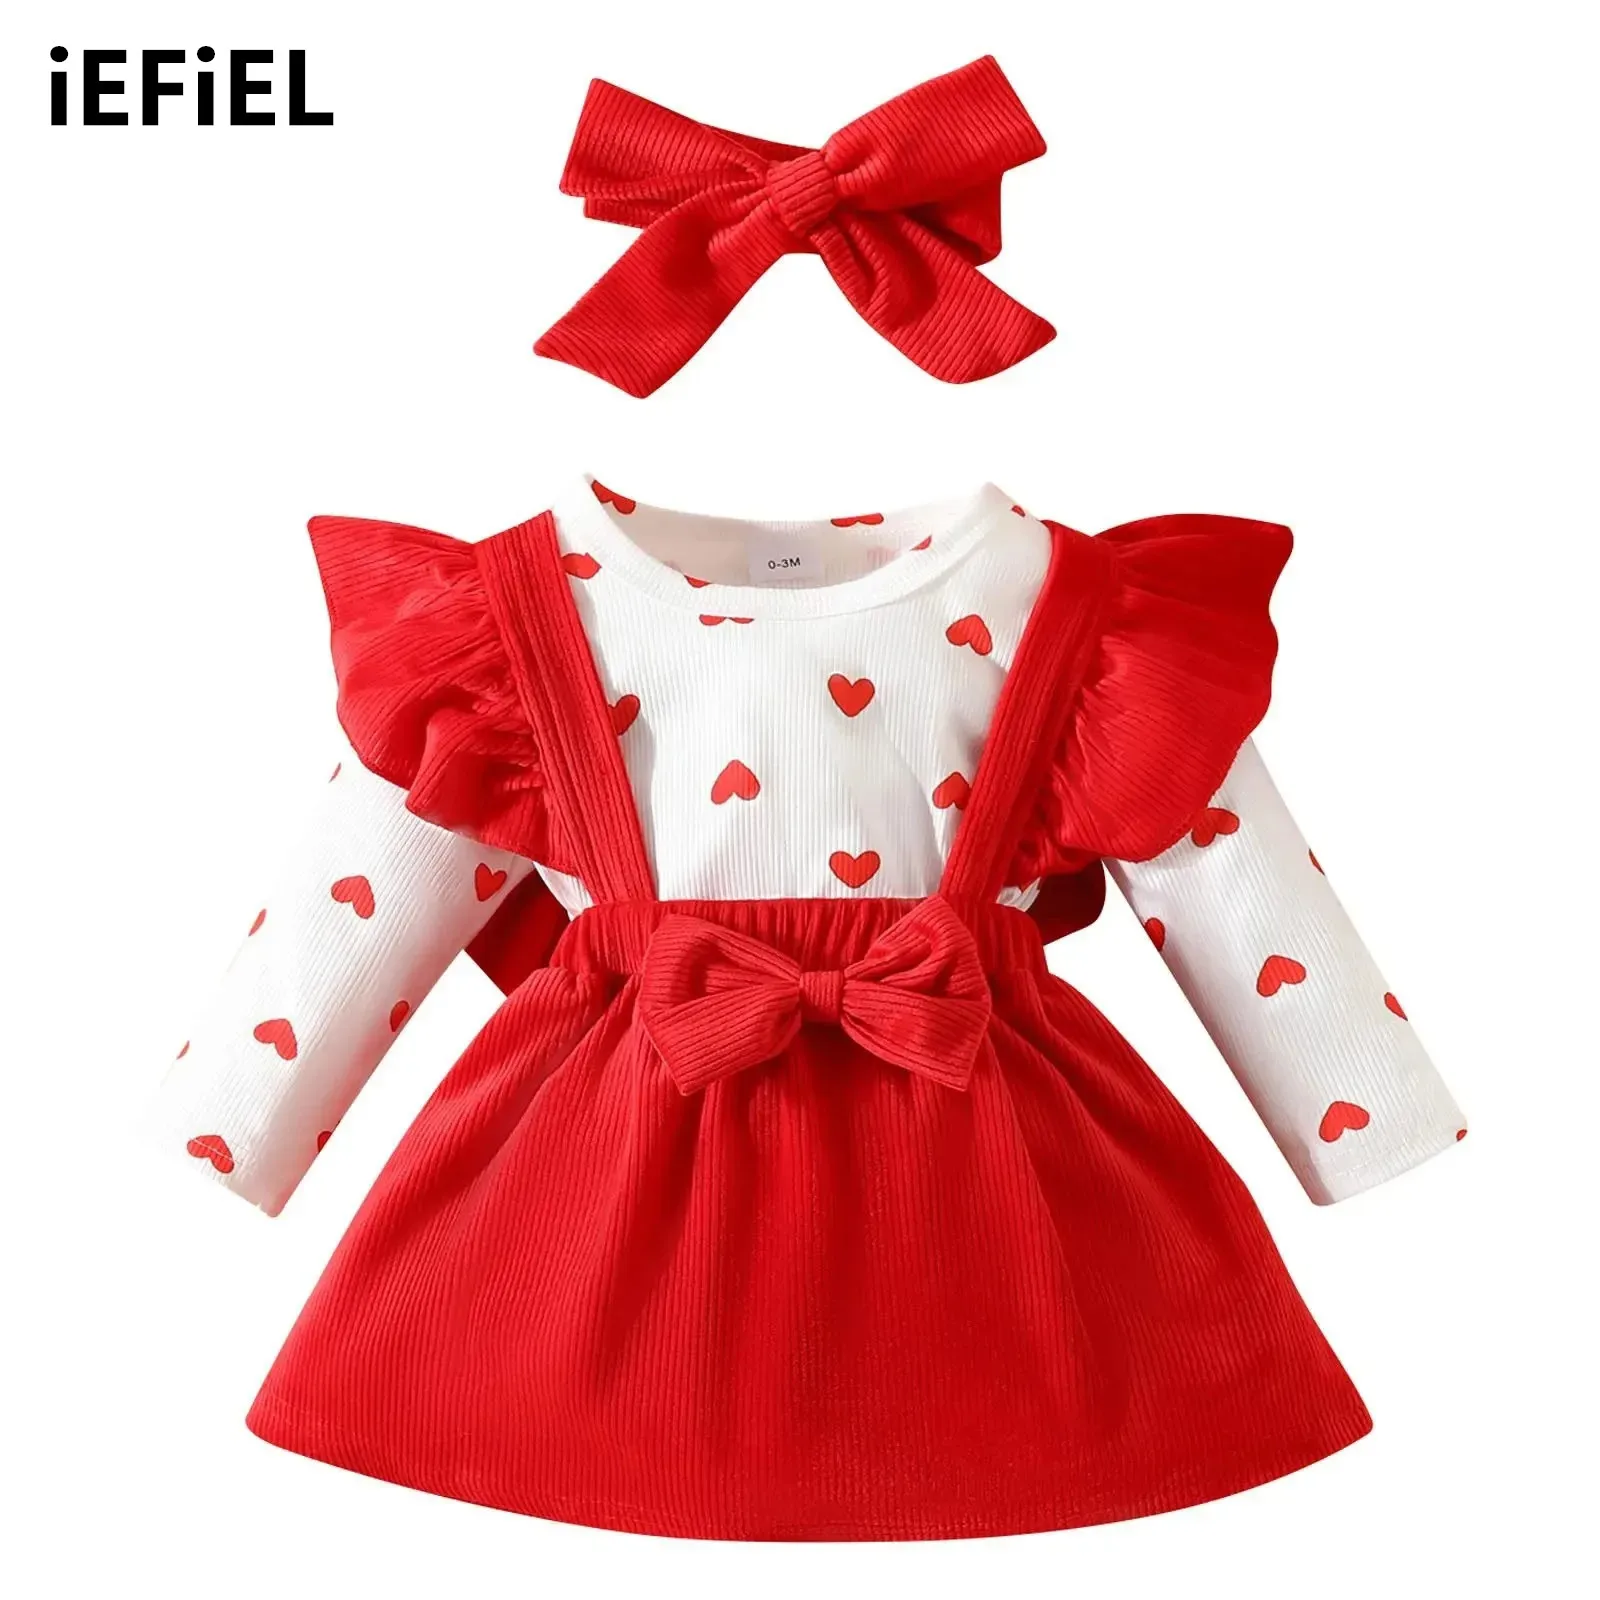 

Baby Girls Corduroy Party Outfit Heart Printed Romper Bodysuit with Ruffle Suspender Skirt And Headband Set Valentine's Day